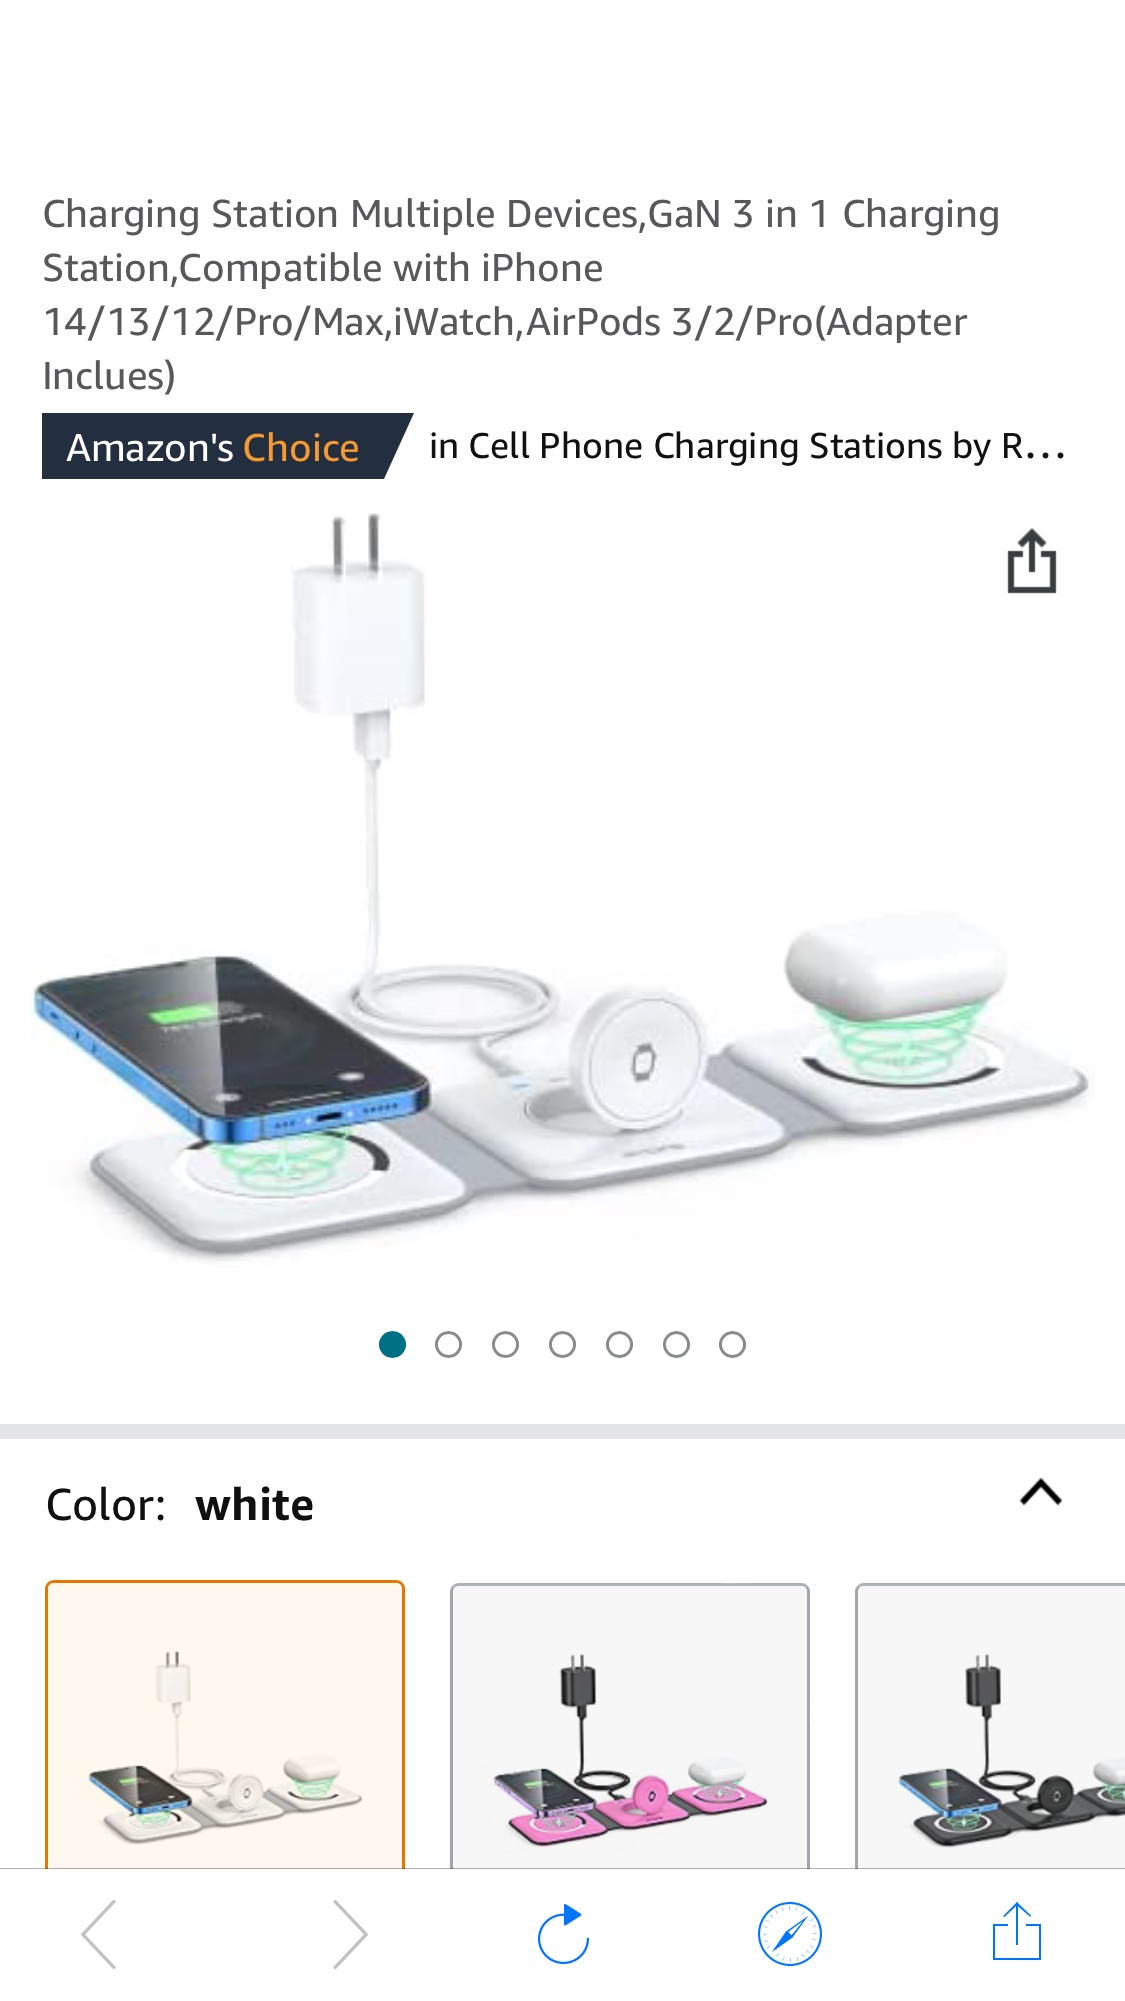 Amazon.com: Wireless Charger 3 in 1,RTOPS Magnetic Travel Wireless Charging Station Multiple Devices,便携式充电器